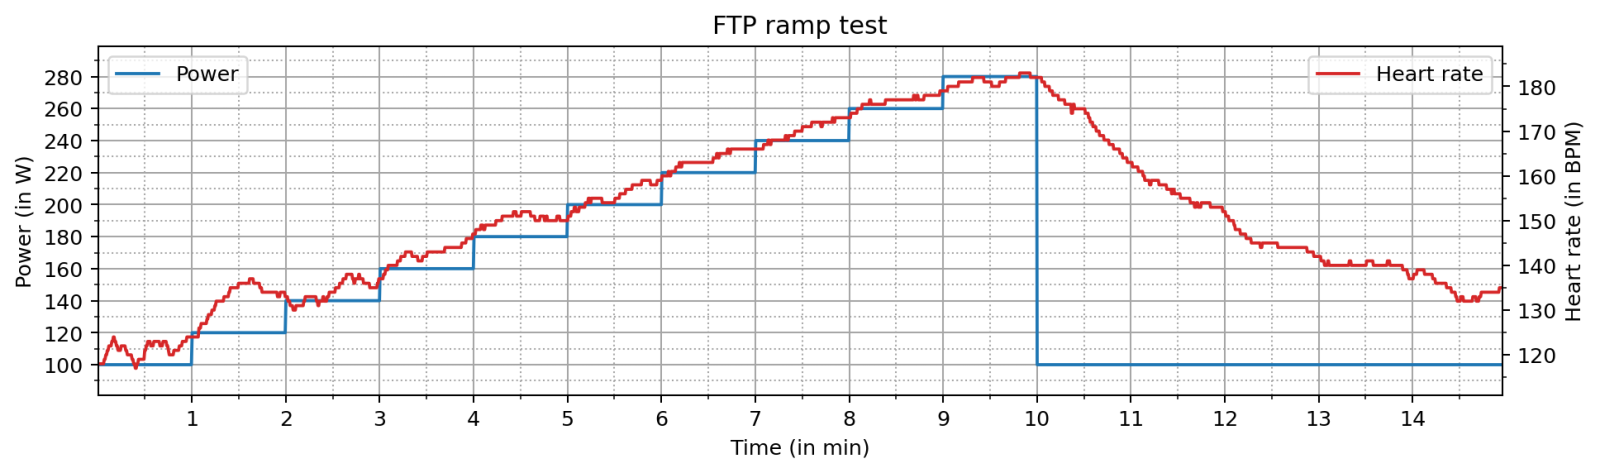 ftp_ramp_test.png